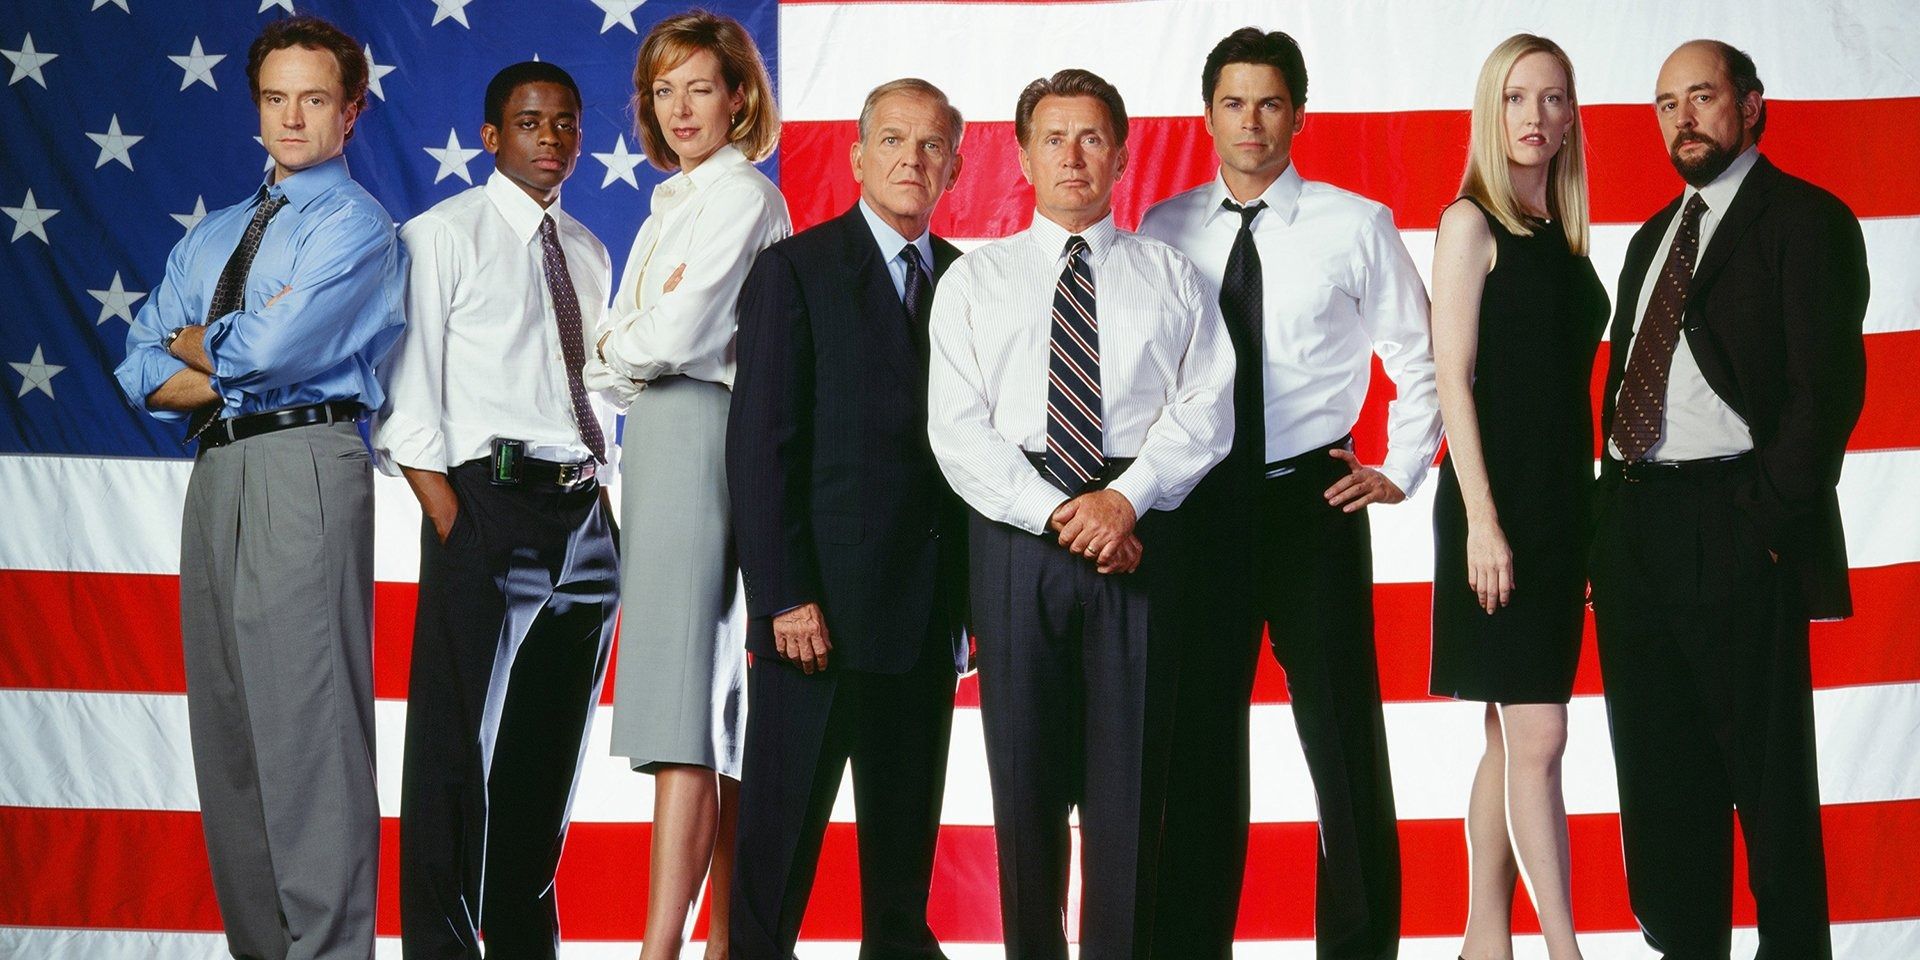 15 Best Episodes of The West Wing According to IMDb